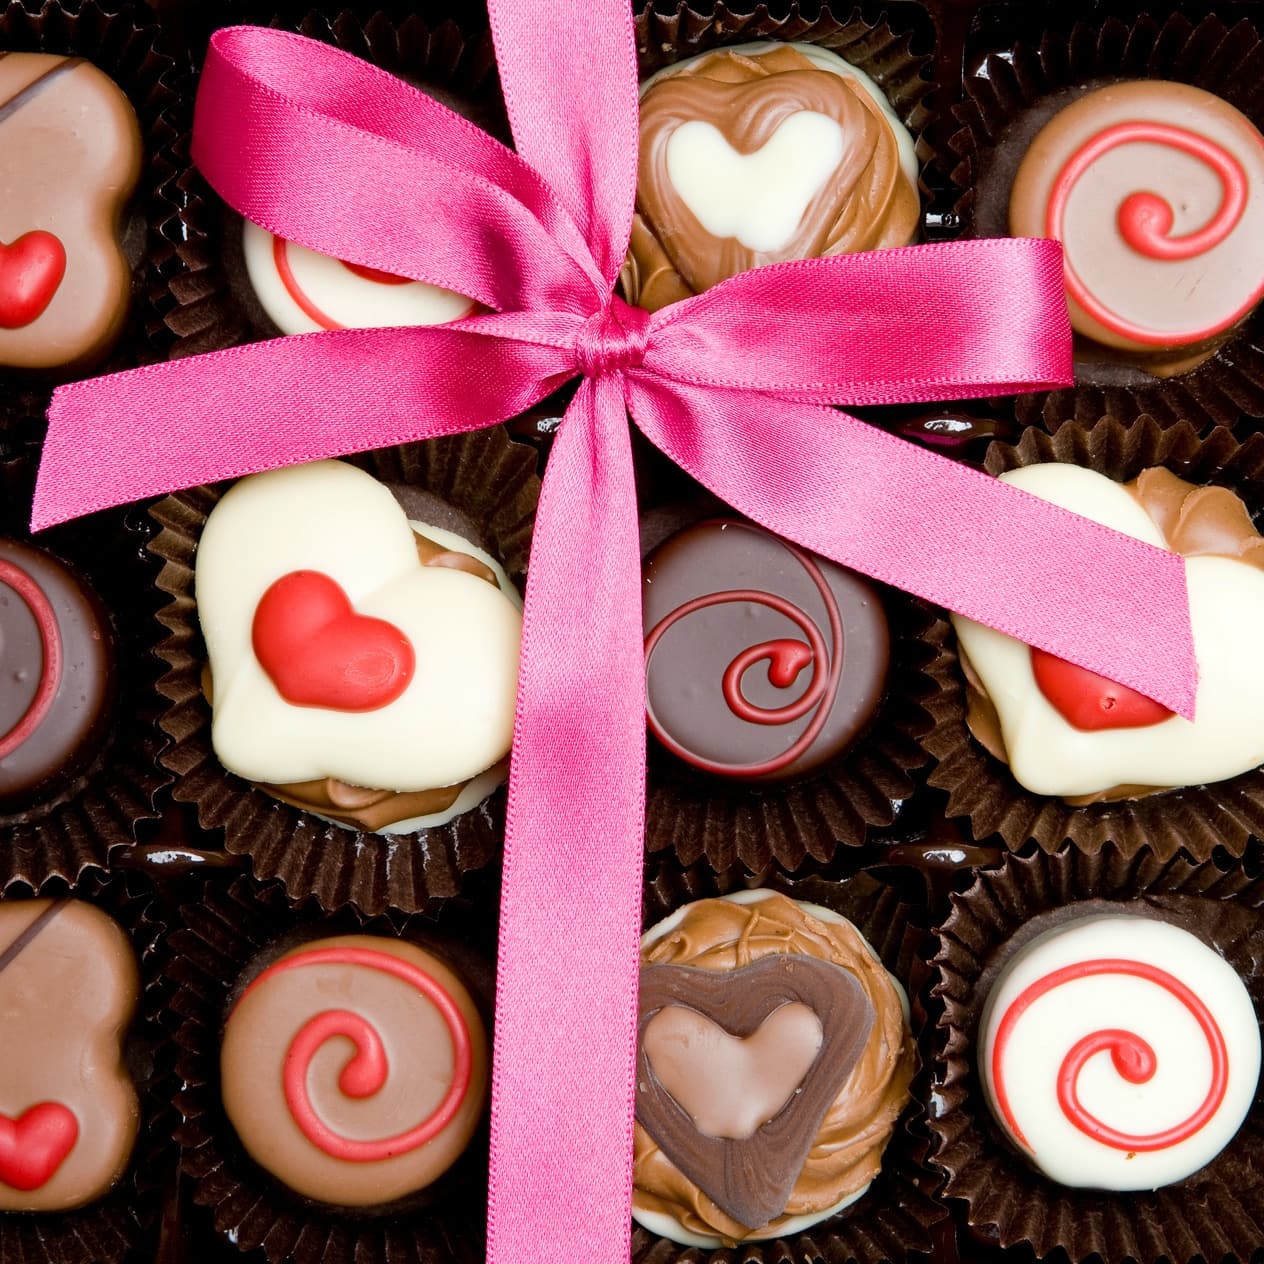 Where do women give men chocolate on Valentine’s Day? (Not vice versa!)